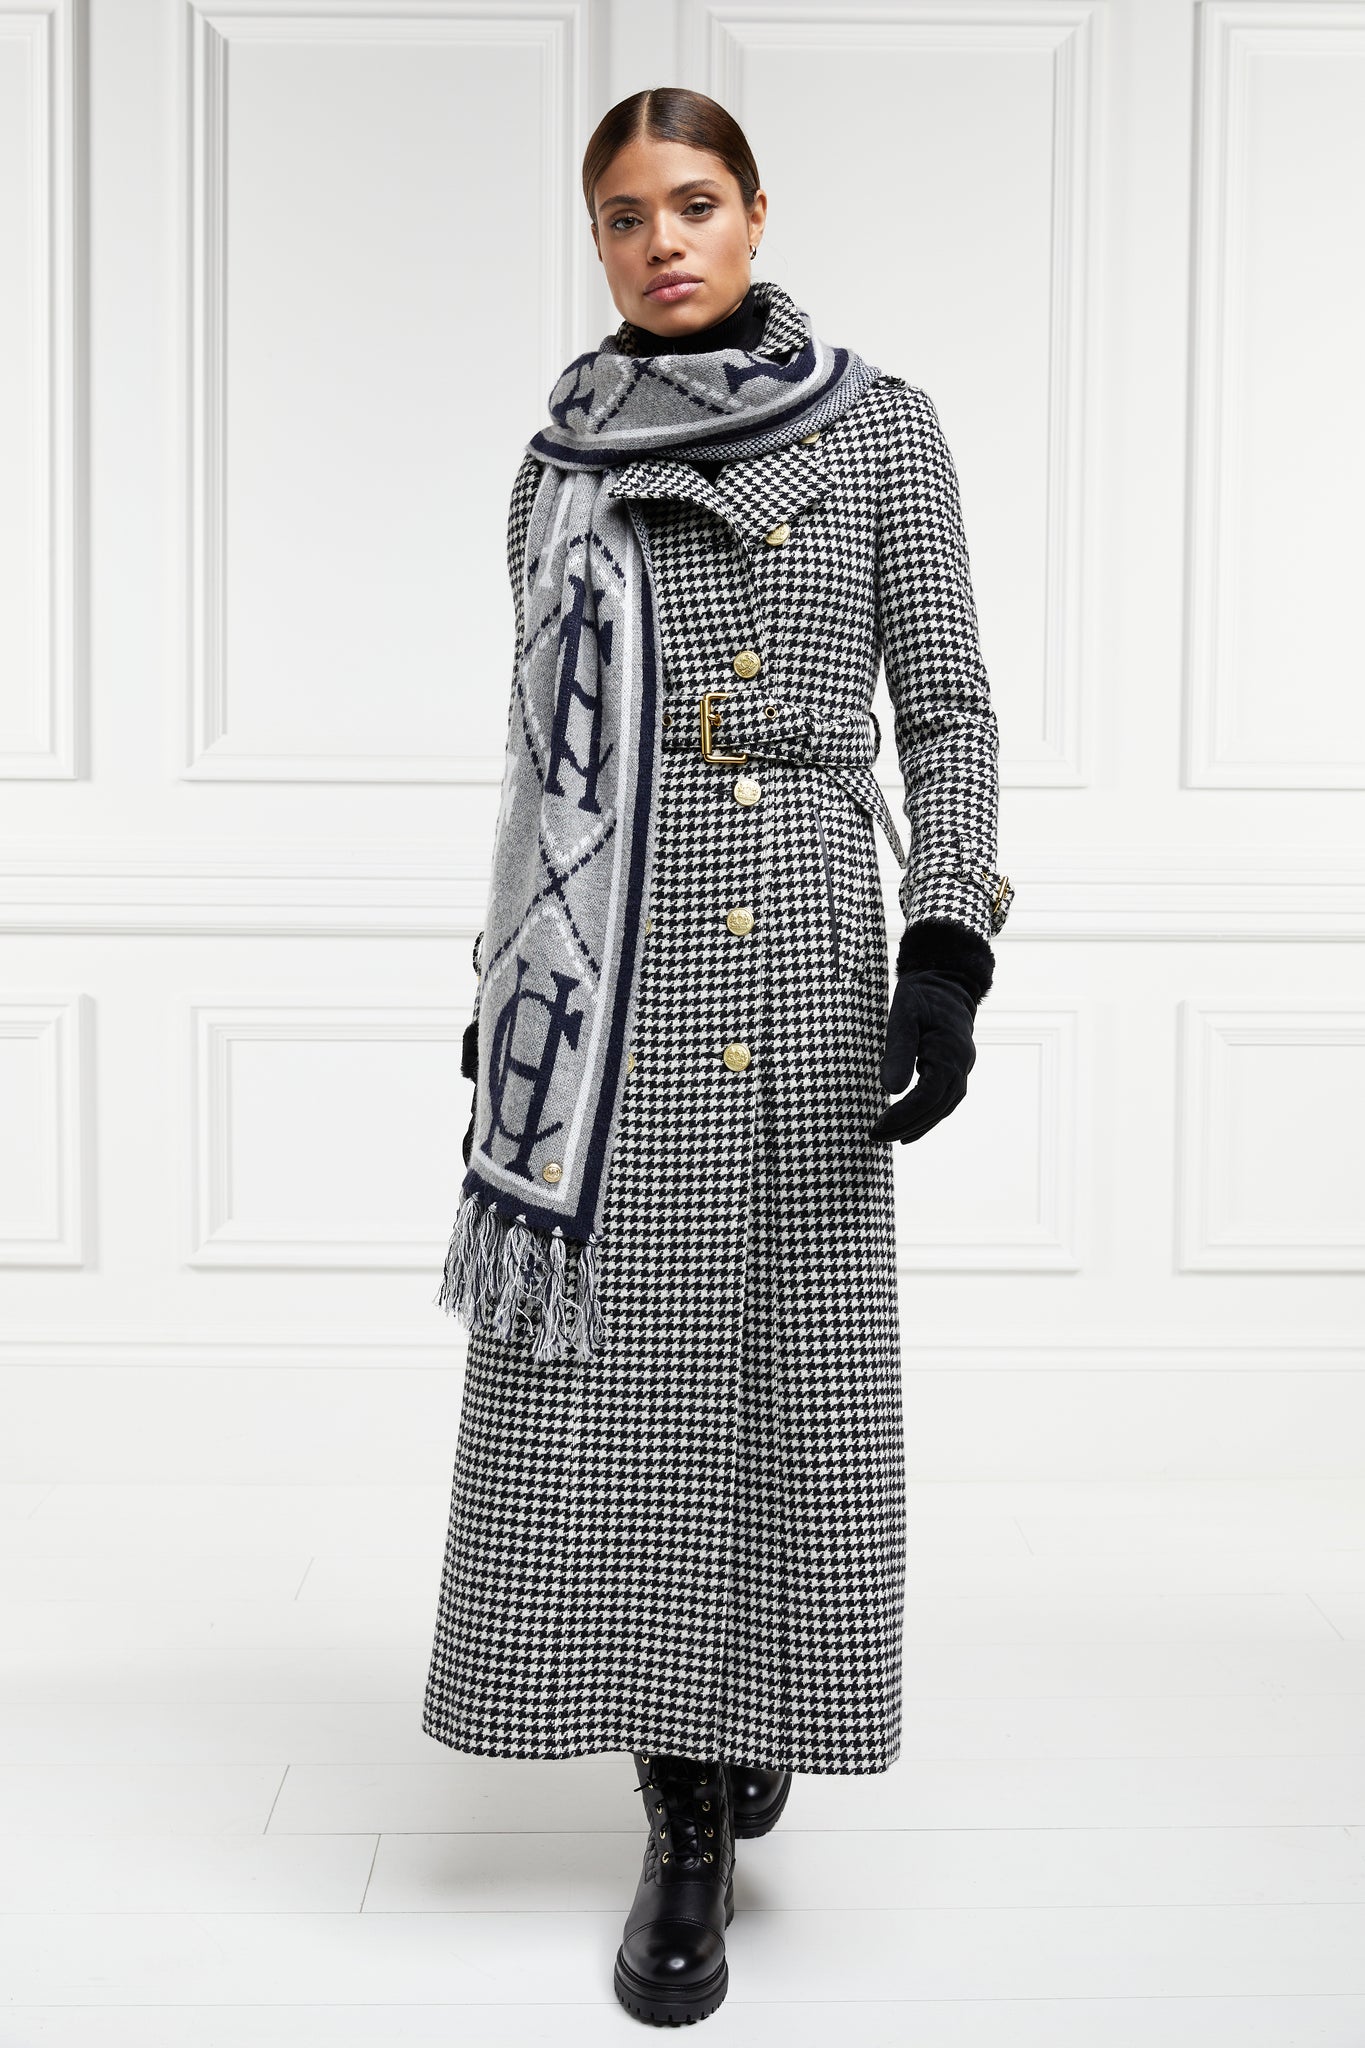 womens black and white houndstooth double breasted full length wool trench coat with grey and navy HC logo print scarf and womens suede black gloves